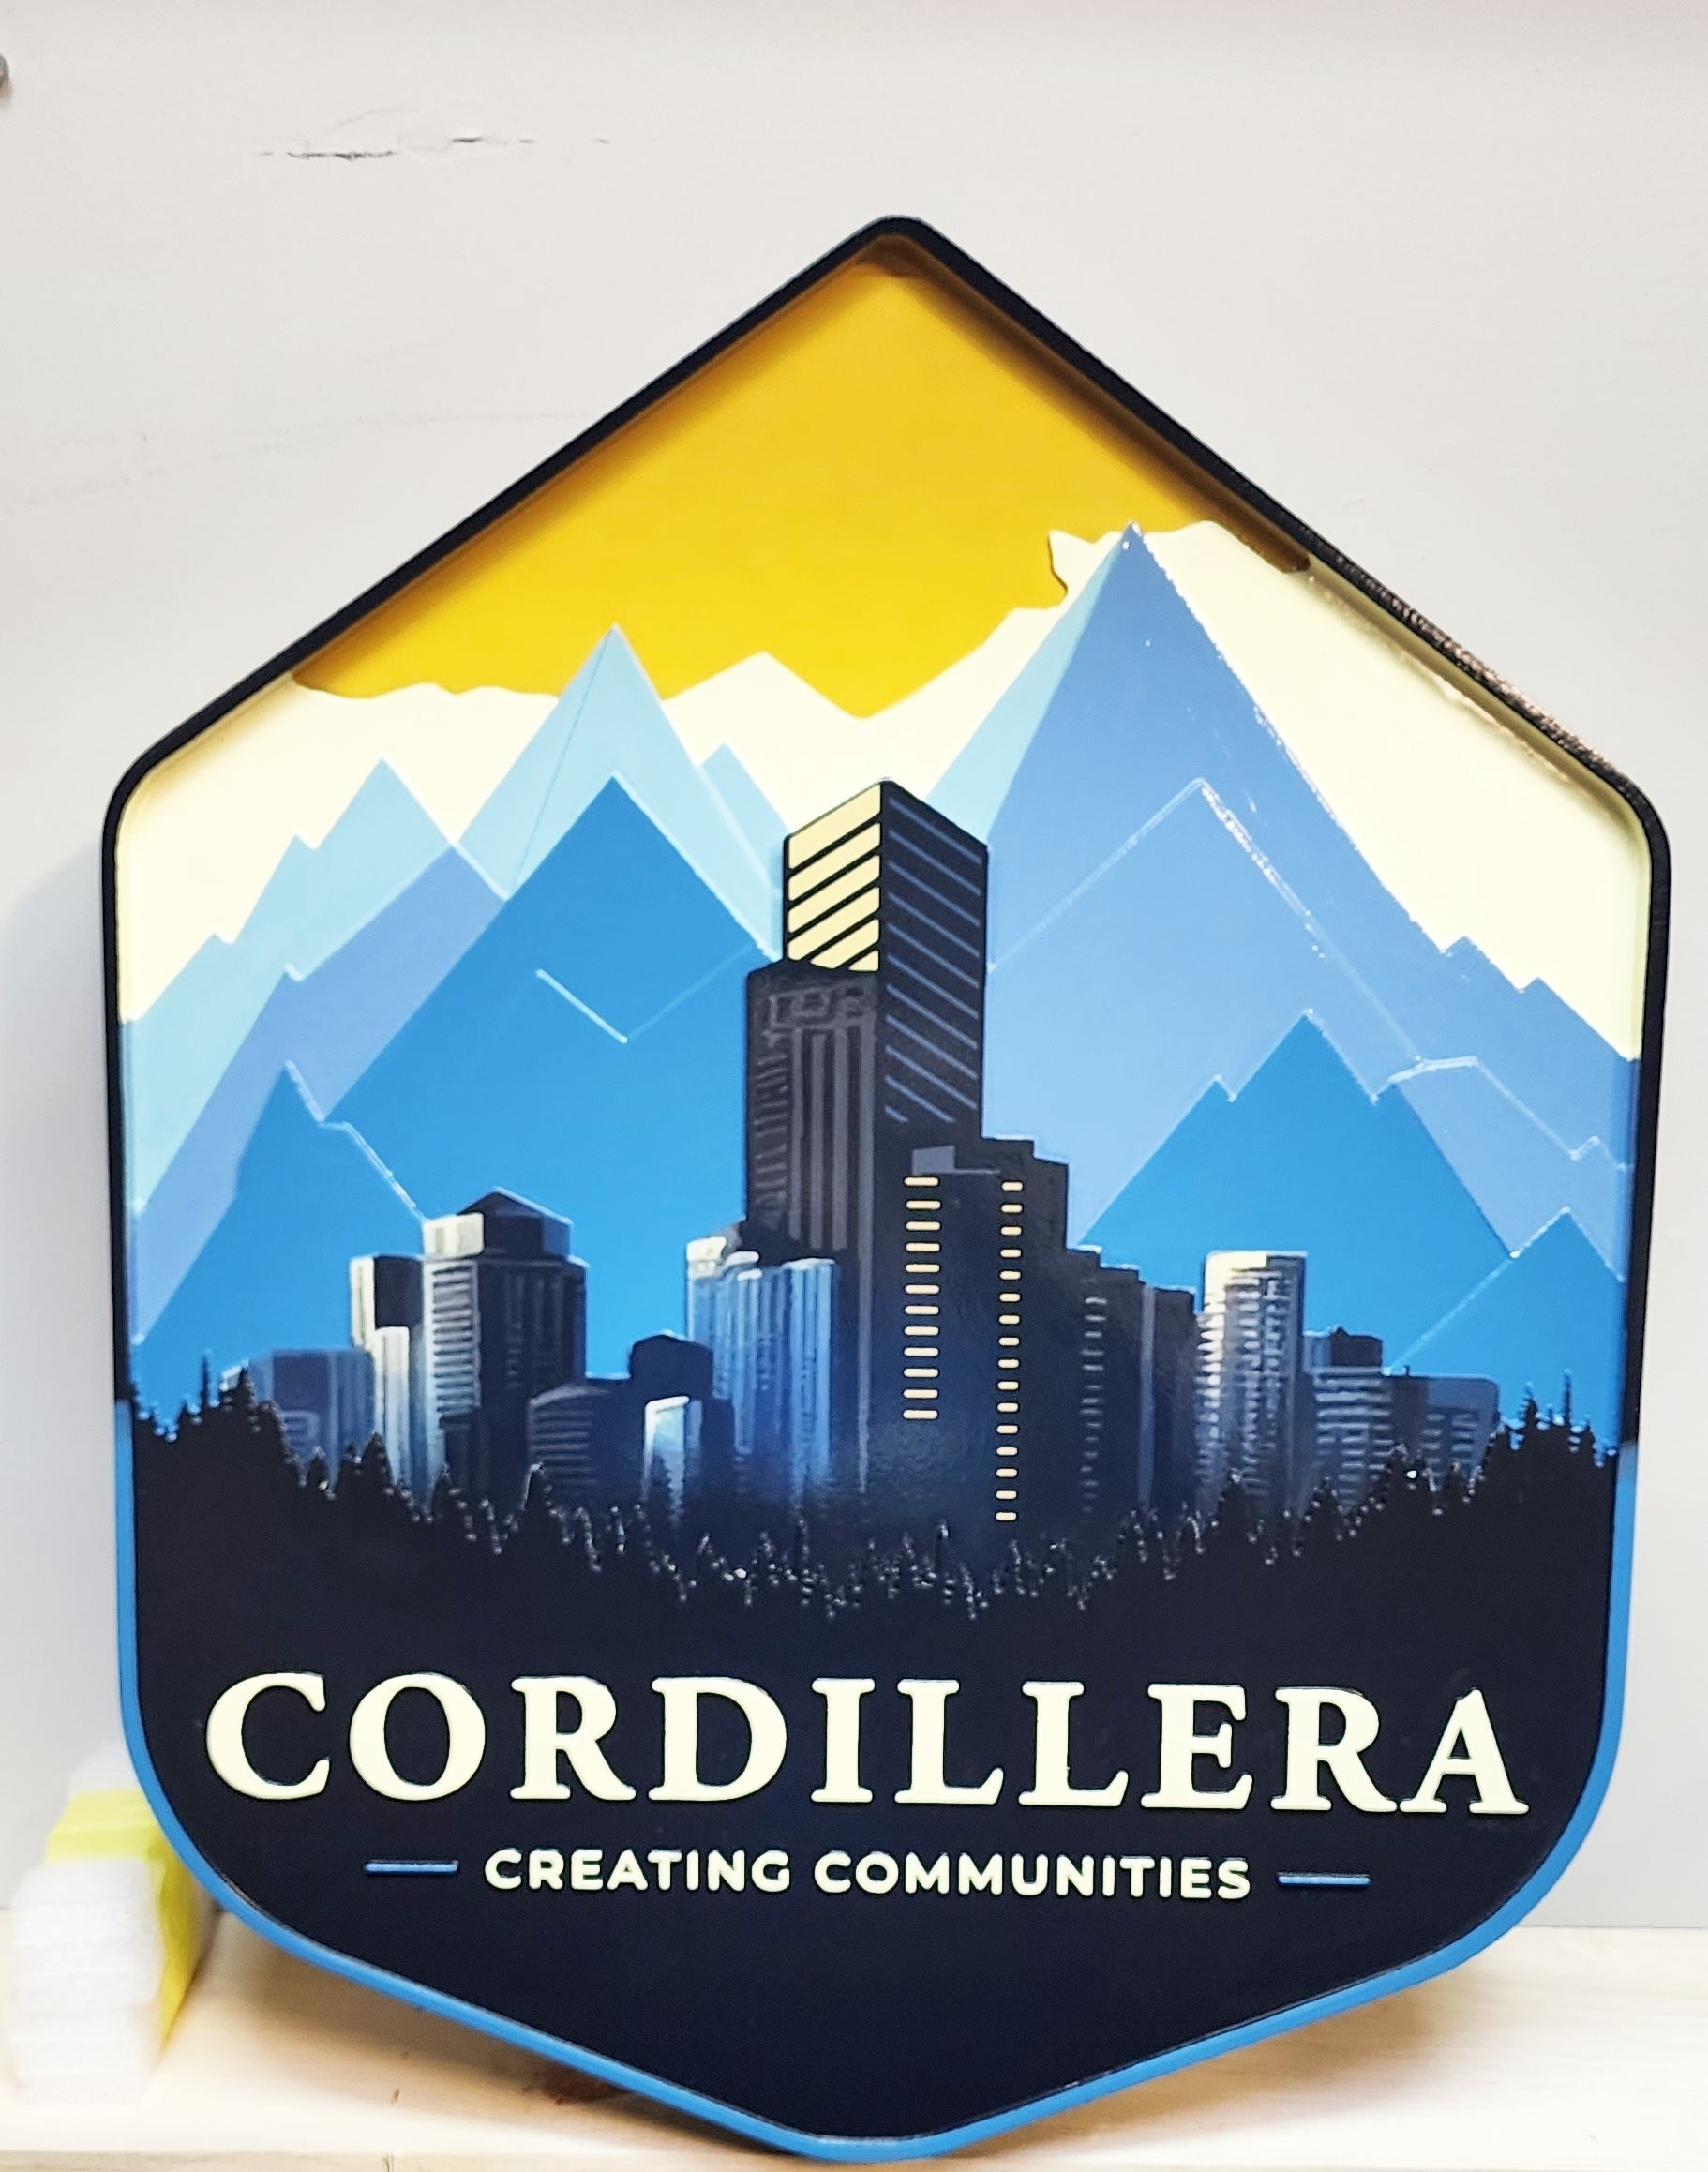 K20231 - Carved 2.5-D Multi-level   entrance sign for the "Cordillera" Residential Community, with City Skyscrapers and Mountains as Artwork